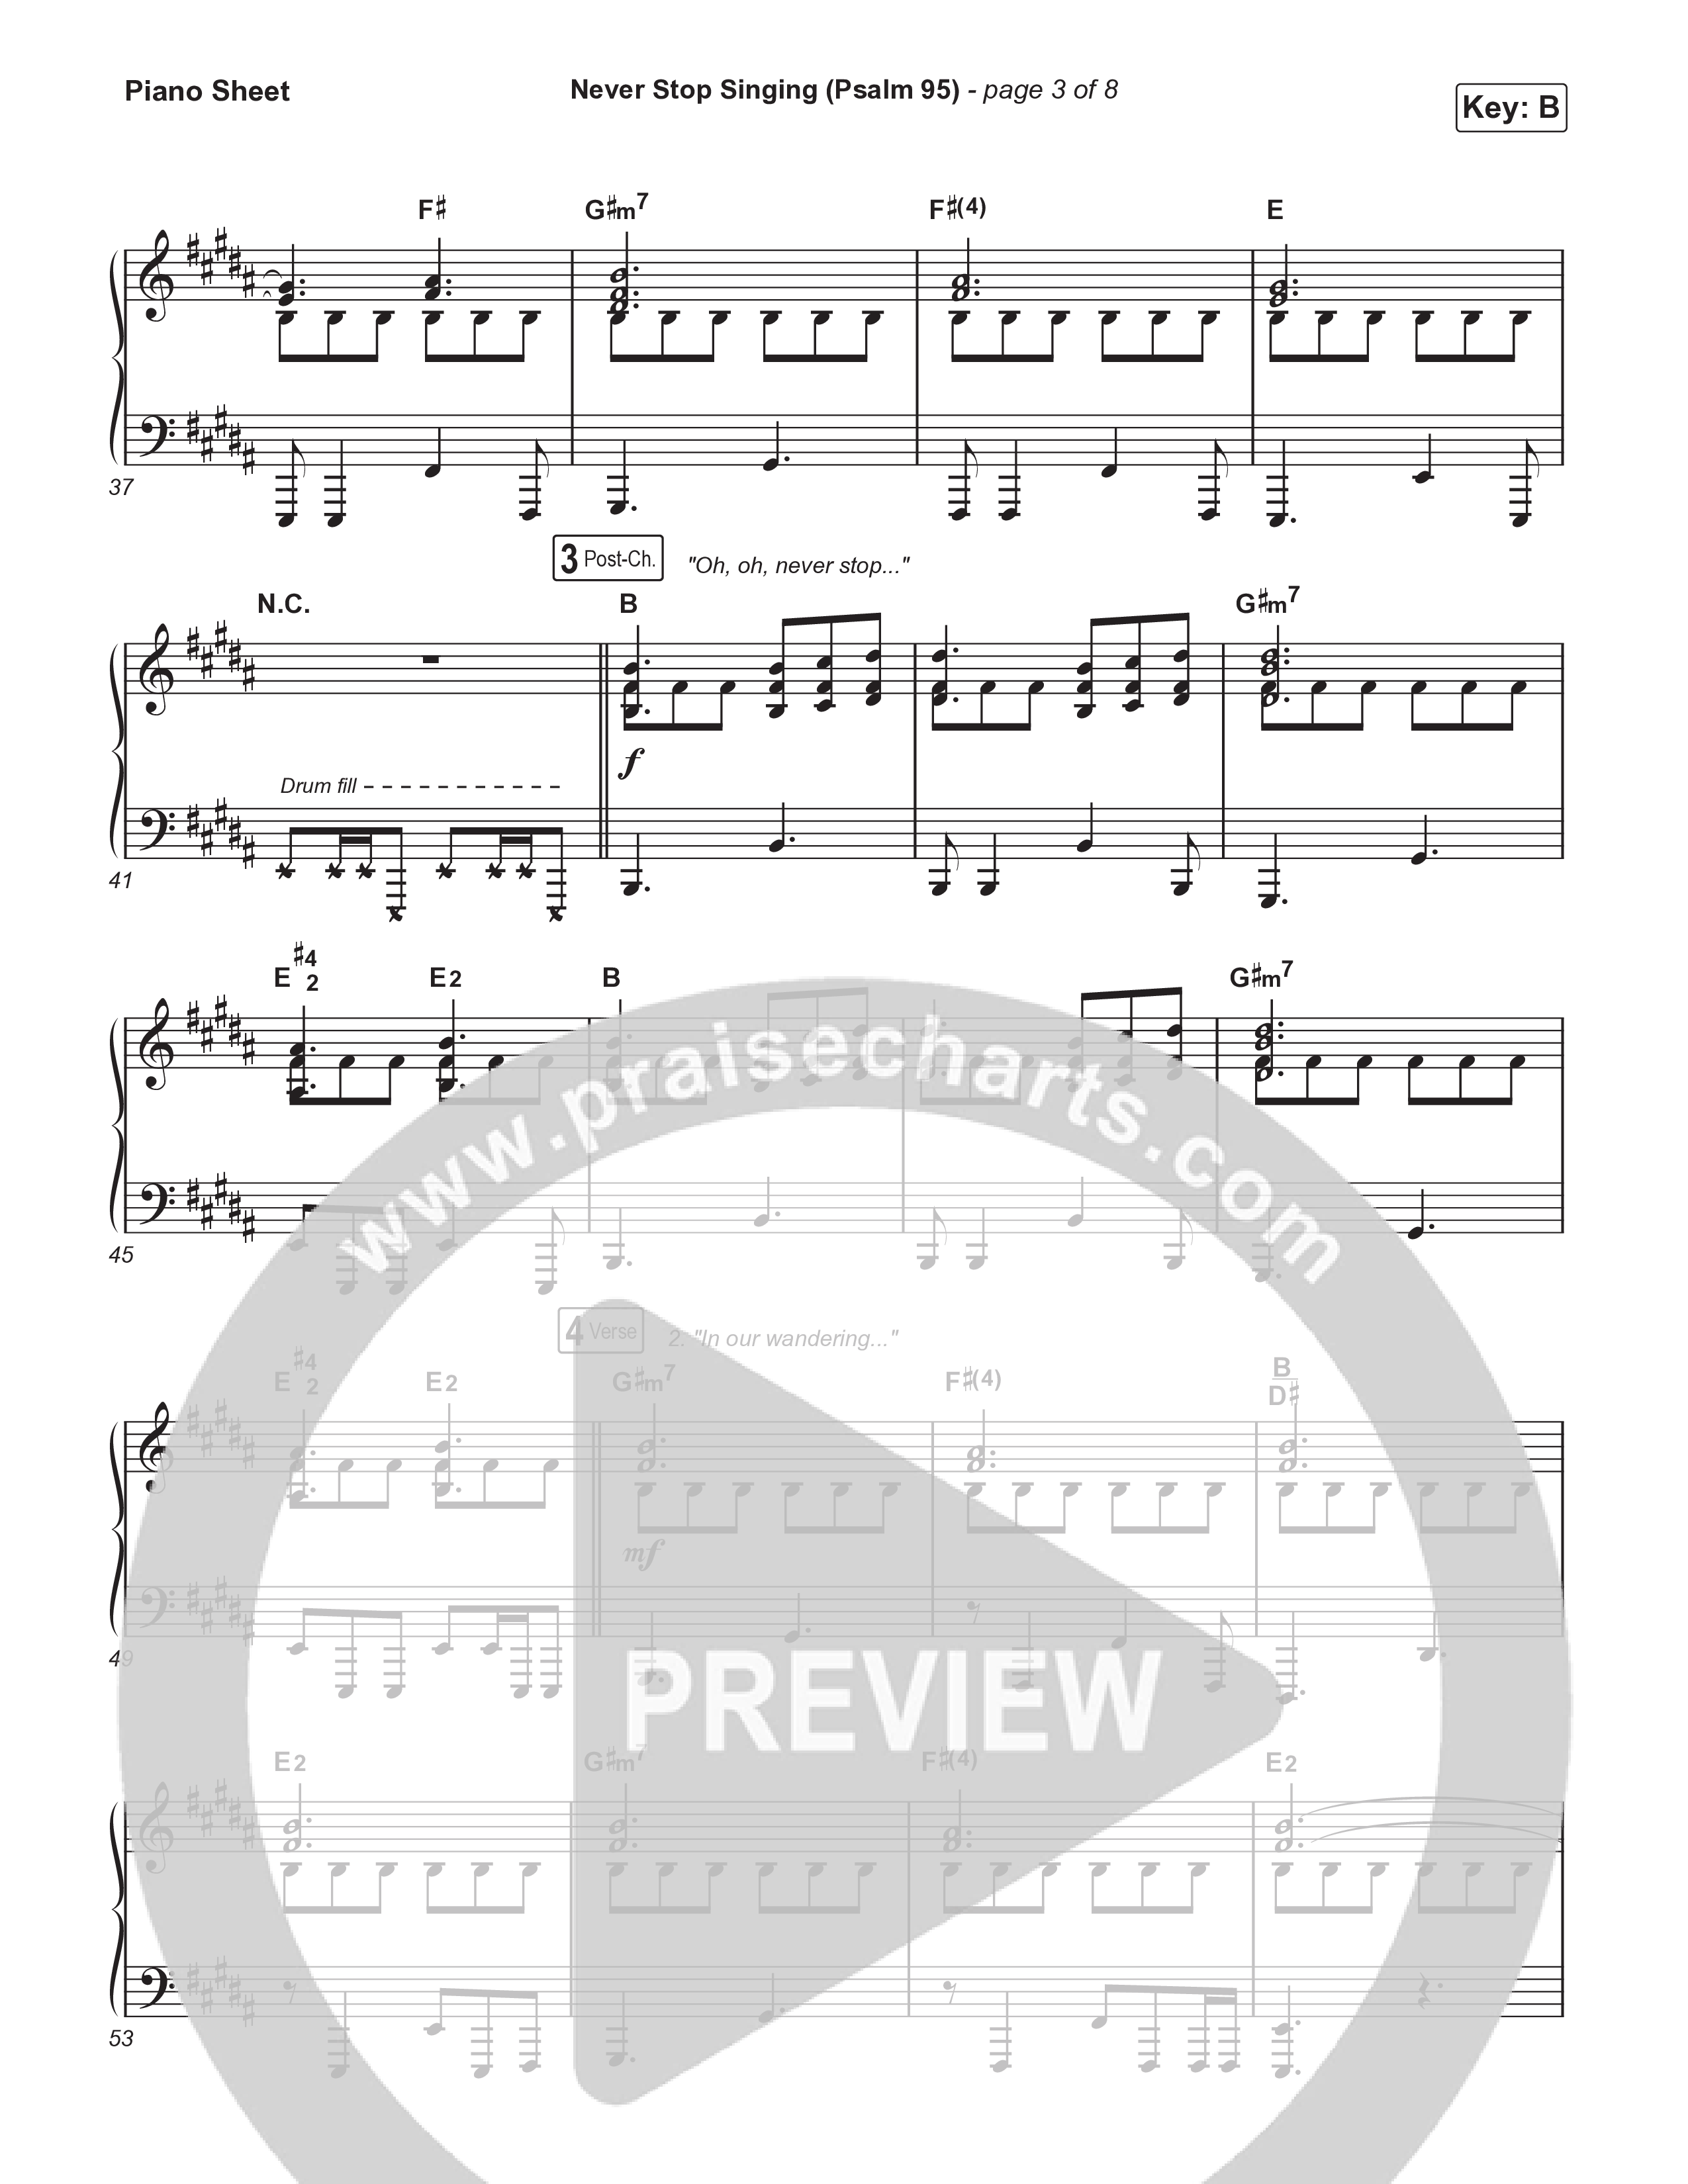 Never Stop Singing (Psalm 95) Piano Sheet (The Worship Initiative / Writers Well)